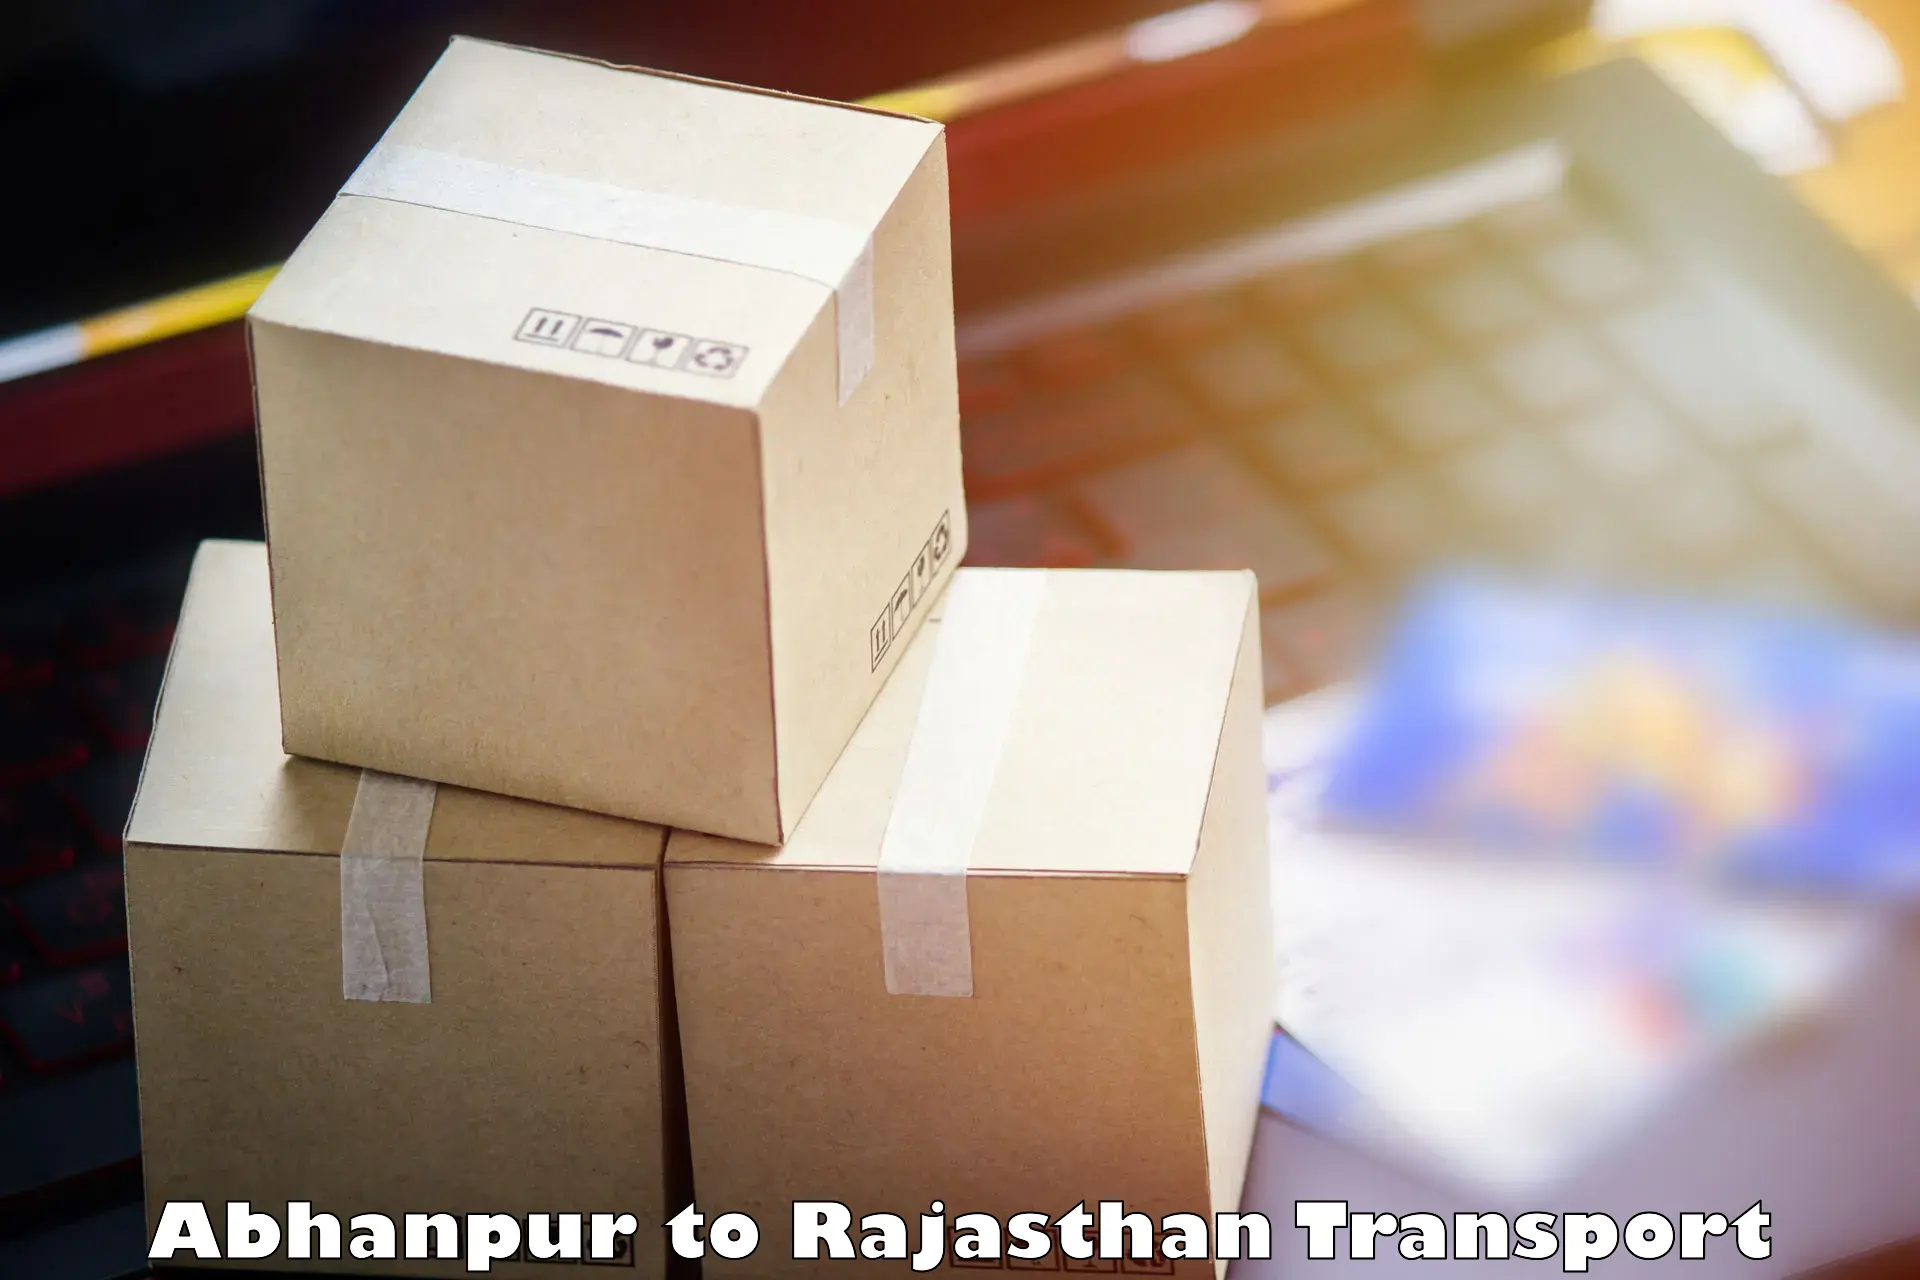 Nearby transport service Abhanpur to Rajasthan